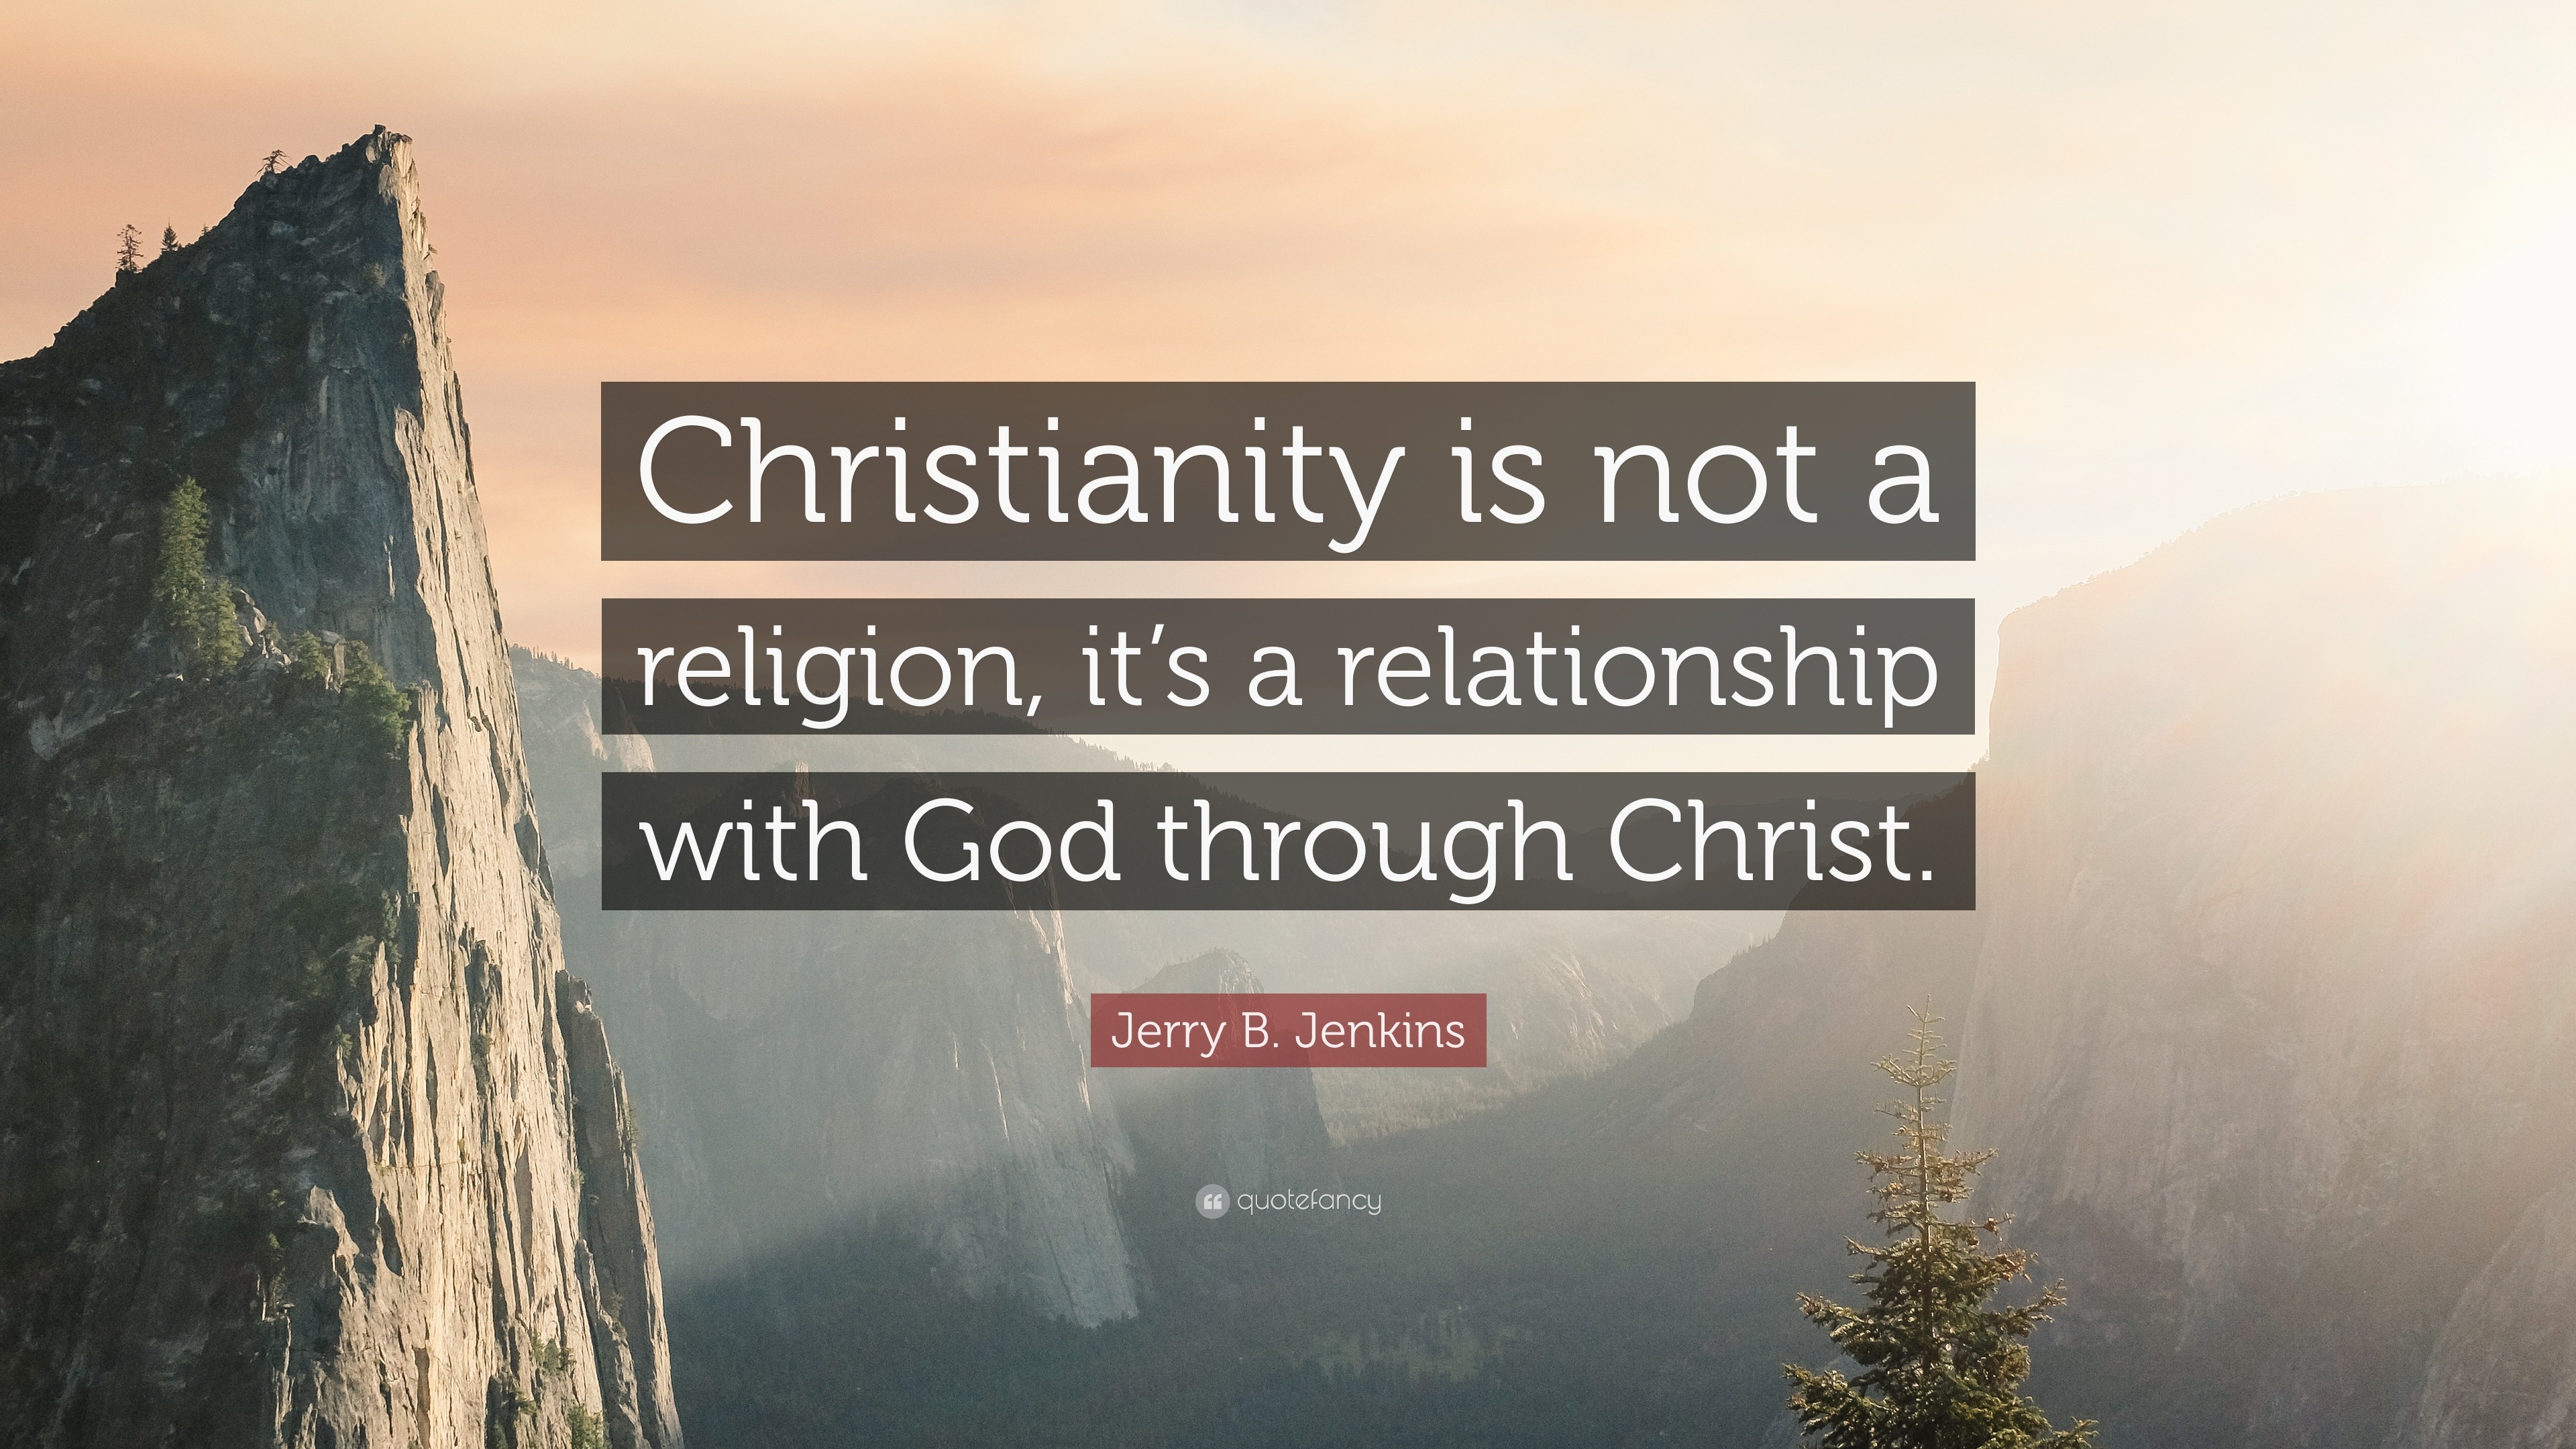 Jerry B. Jenkins Quote: “Christianity is not a religion, it’s a